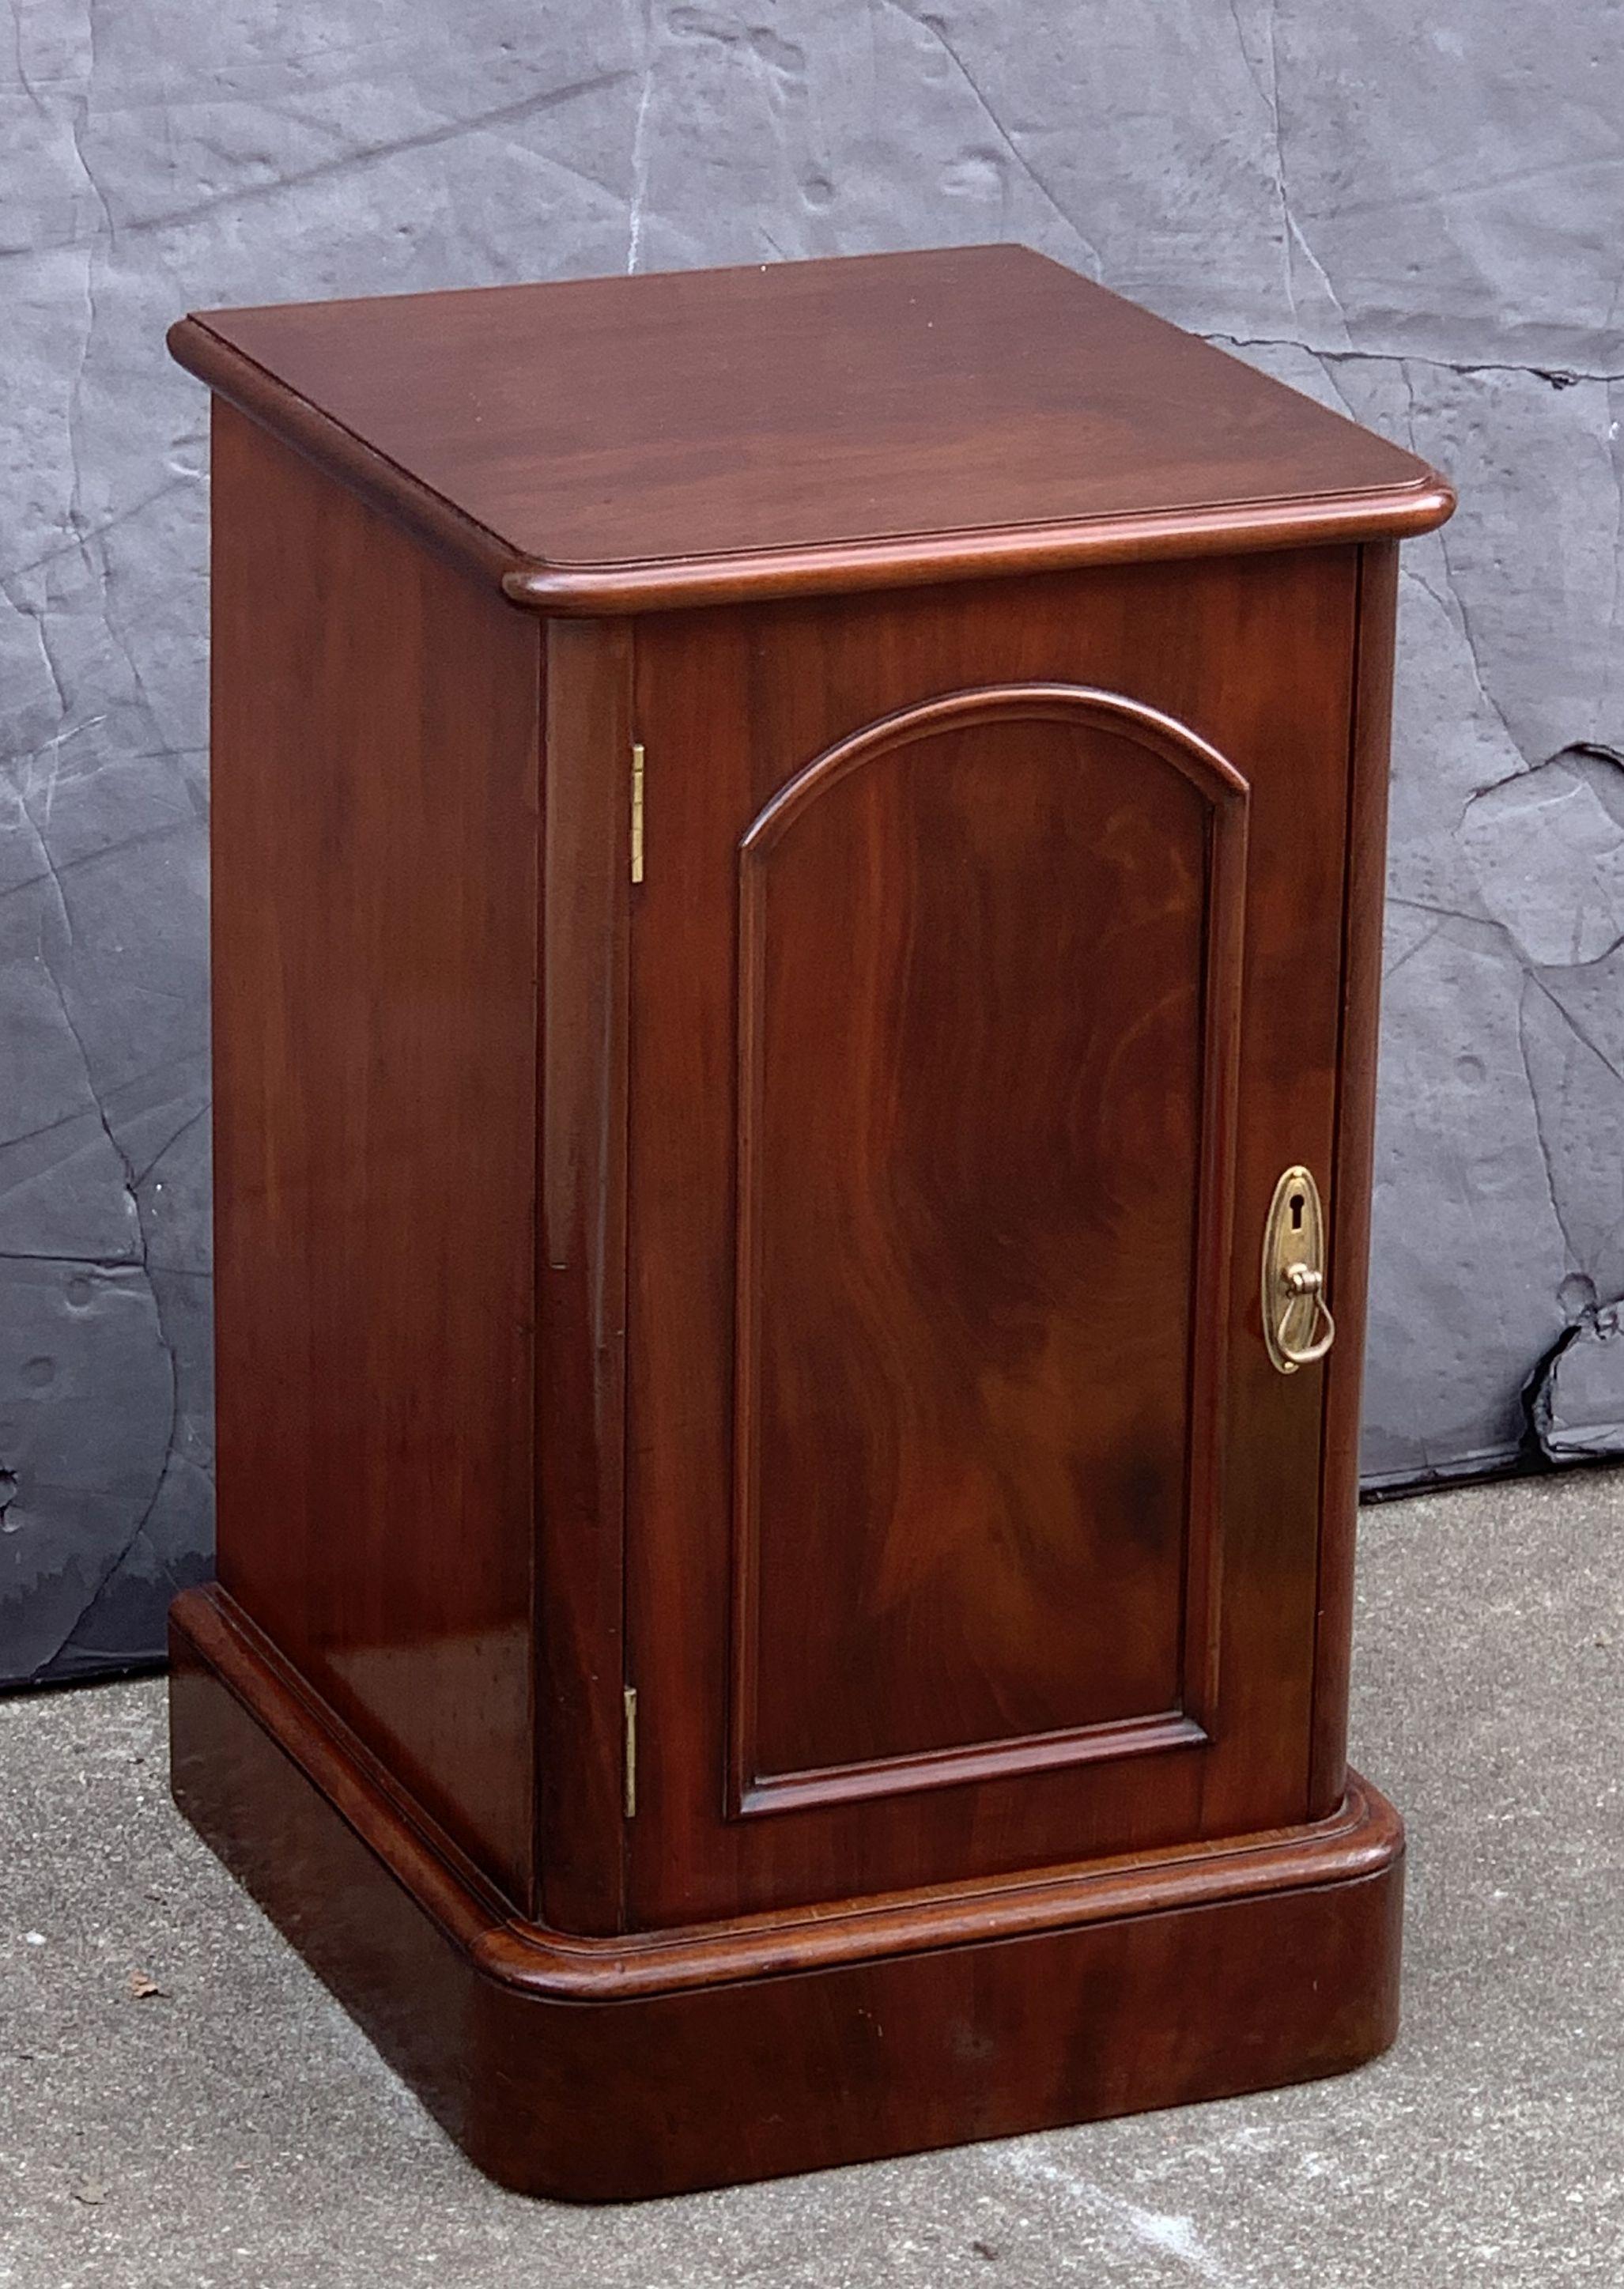 English Bedside Chests or Cabinet Nightstands of Mahogany, Priced as a Pair 9